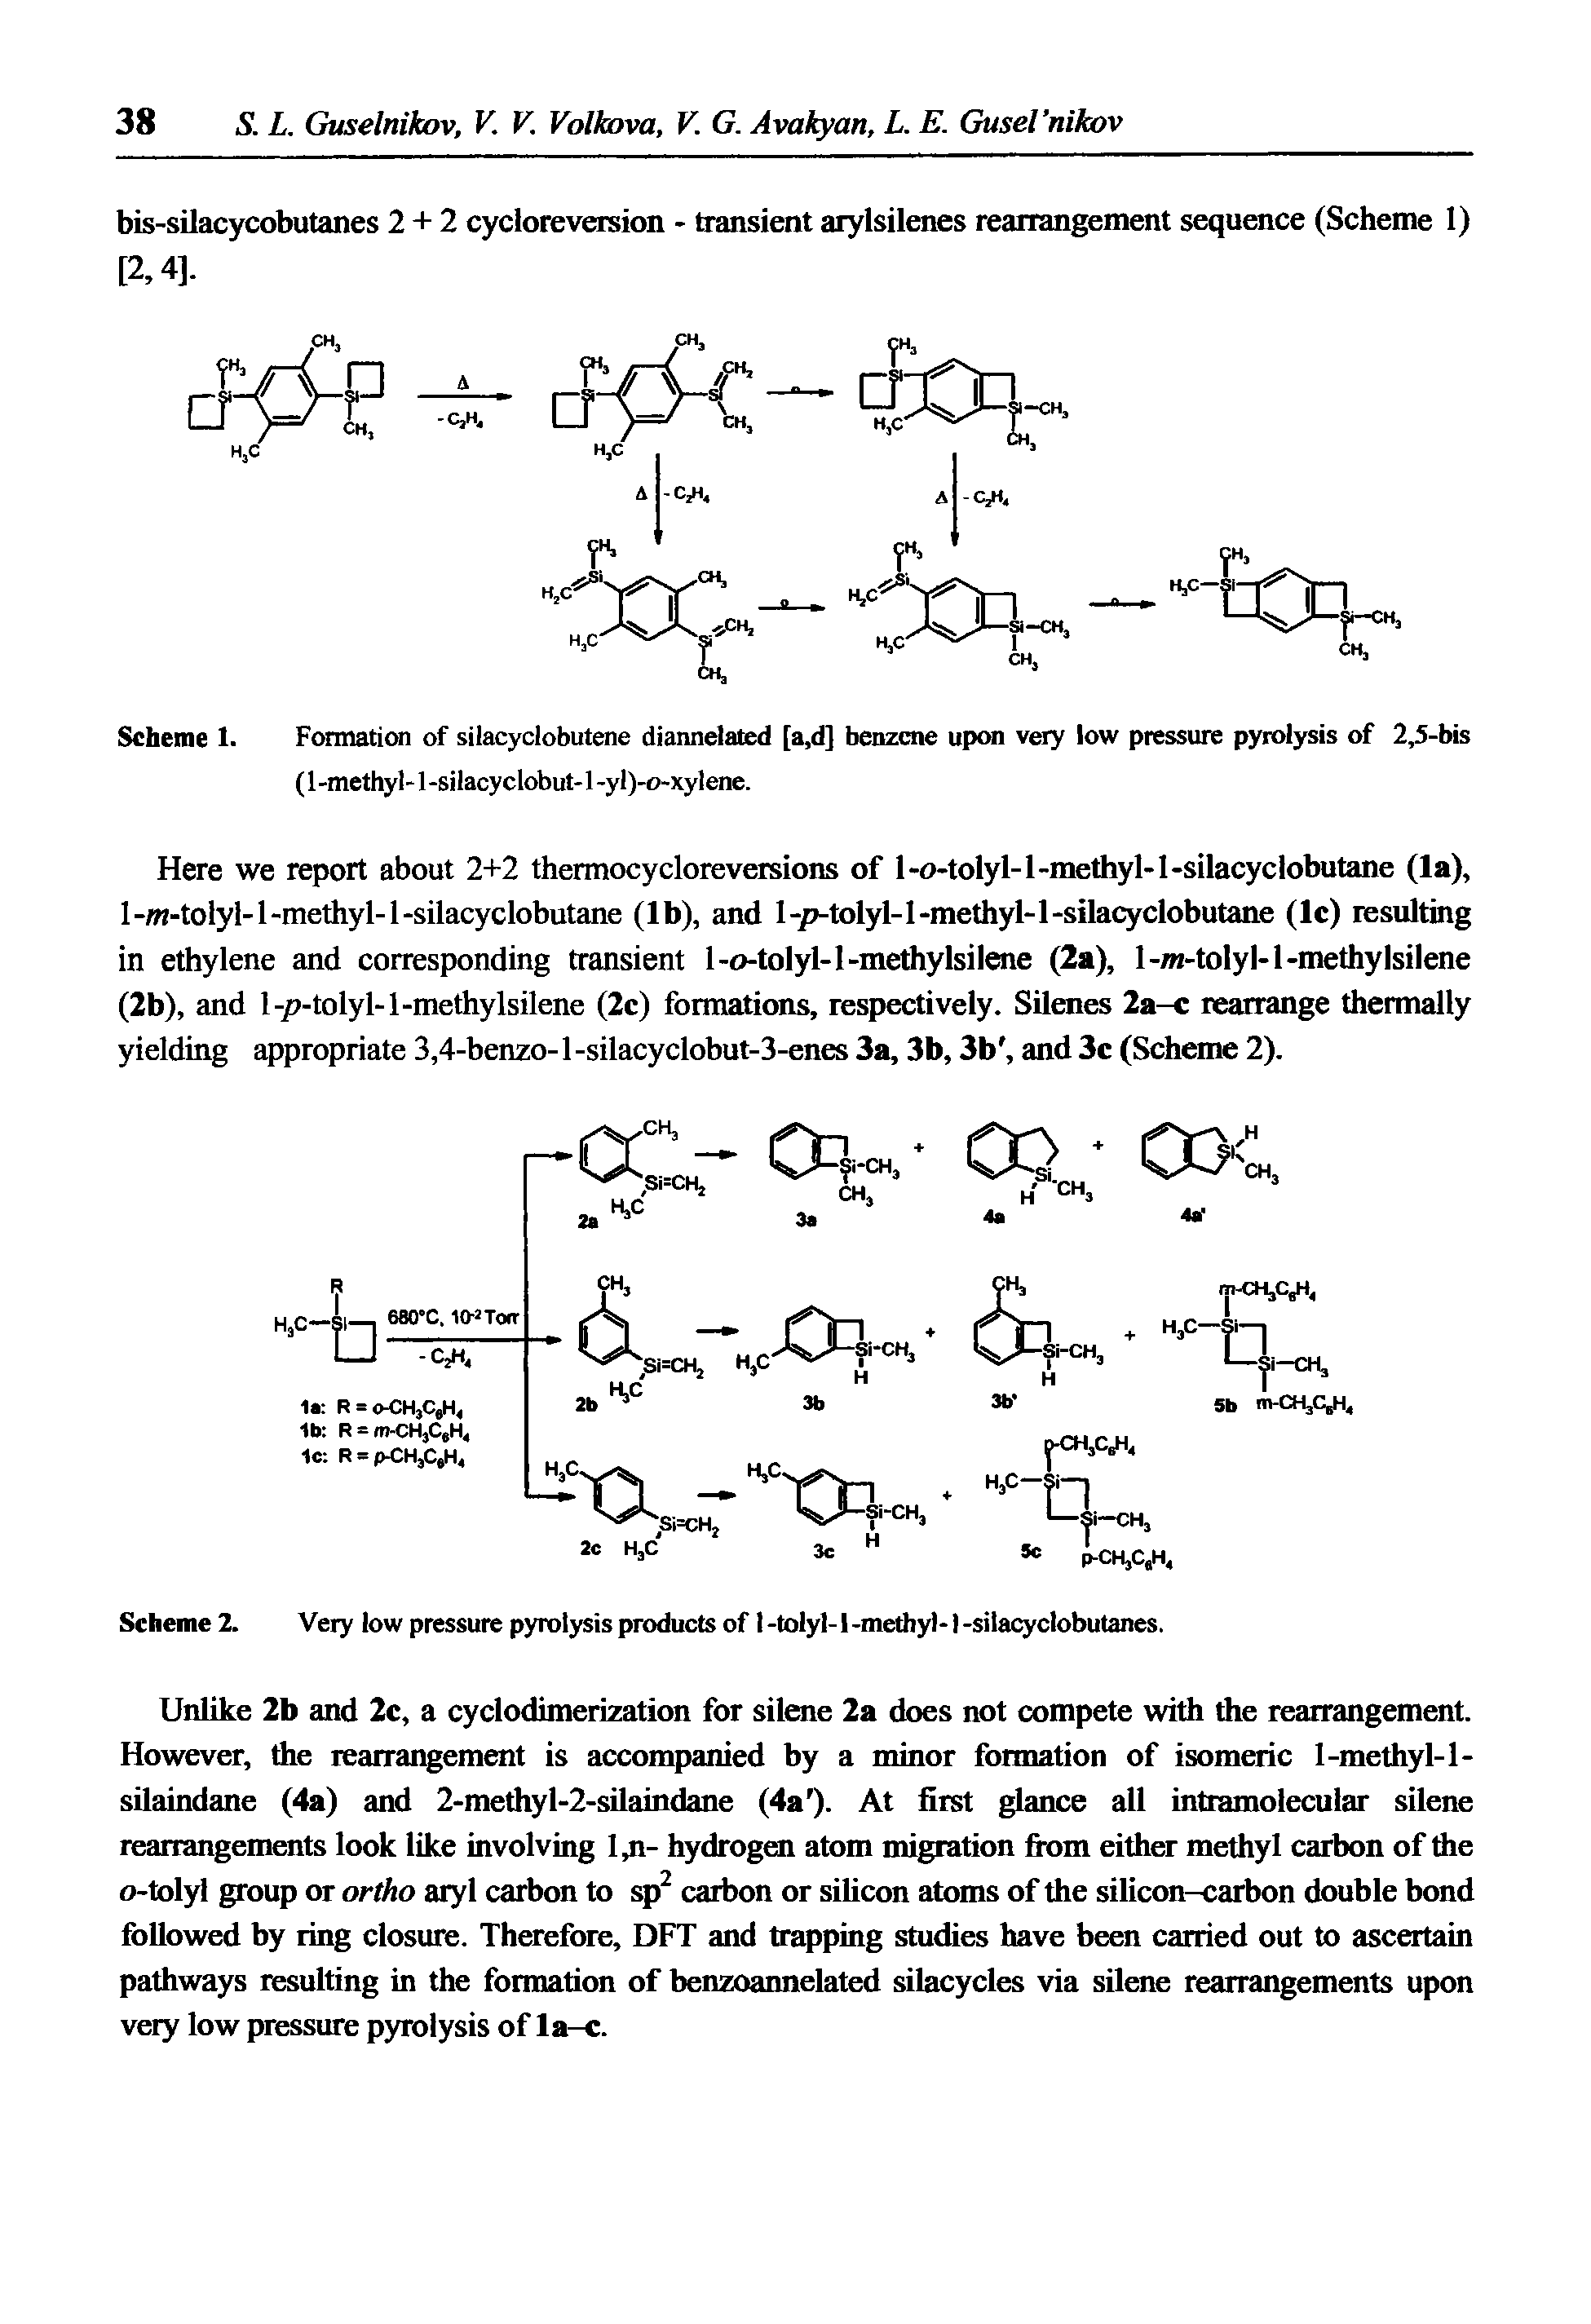 Scheme 2. Very low pressure pyrolysis products of 1 -tolyl-1 -methyl-1 -silacyclobutanes.